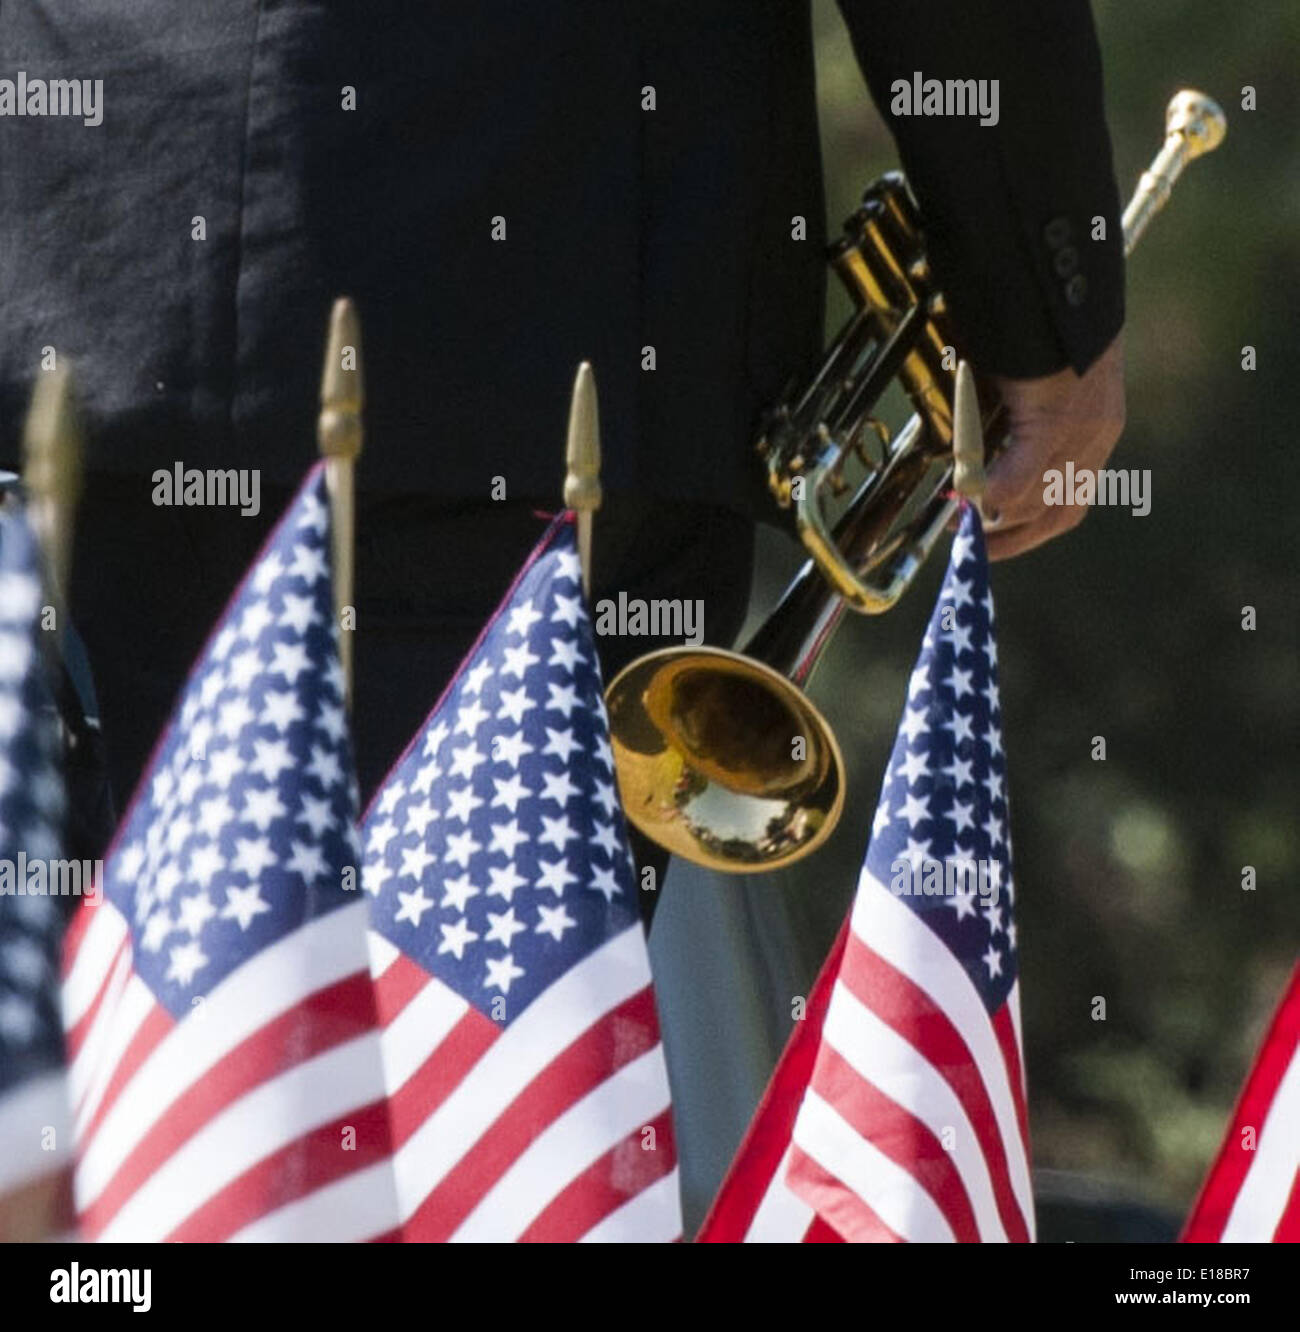 May 26, 2014 - Capistrano Beach/Dana Point, California, U.S - David Longoria came down from Pasadena to play Taps for Monday's Memorial Day ceremony at Pines Park in Capistrano Beach. Taps can be played on trumpet or a bugle and is a traditional Memorial Day honor meant to remember veterans and their sacrifice in service to their country.----Dana Point's Veterans of Foreign Wars Post 9934, along with the Ladies Auxiliary and the City of Dana Point, hosted this year's Memorial Day Ceremony at Pines Park in Capistrano Beach. Credit:  ZUMA Press, Inc./Alamy Live News Stock Photo